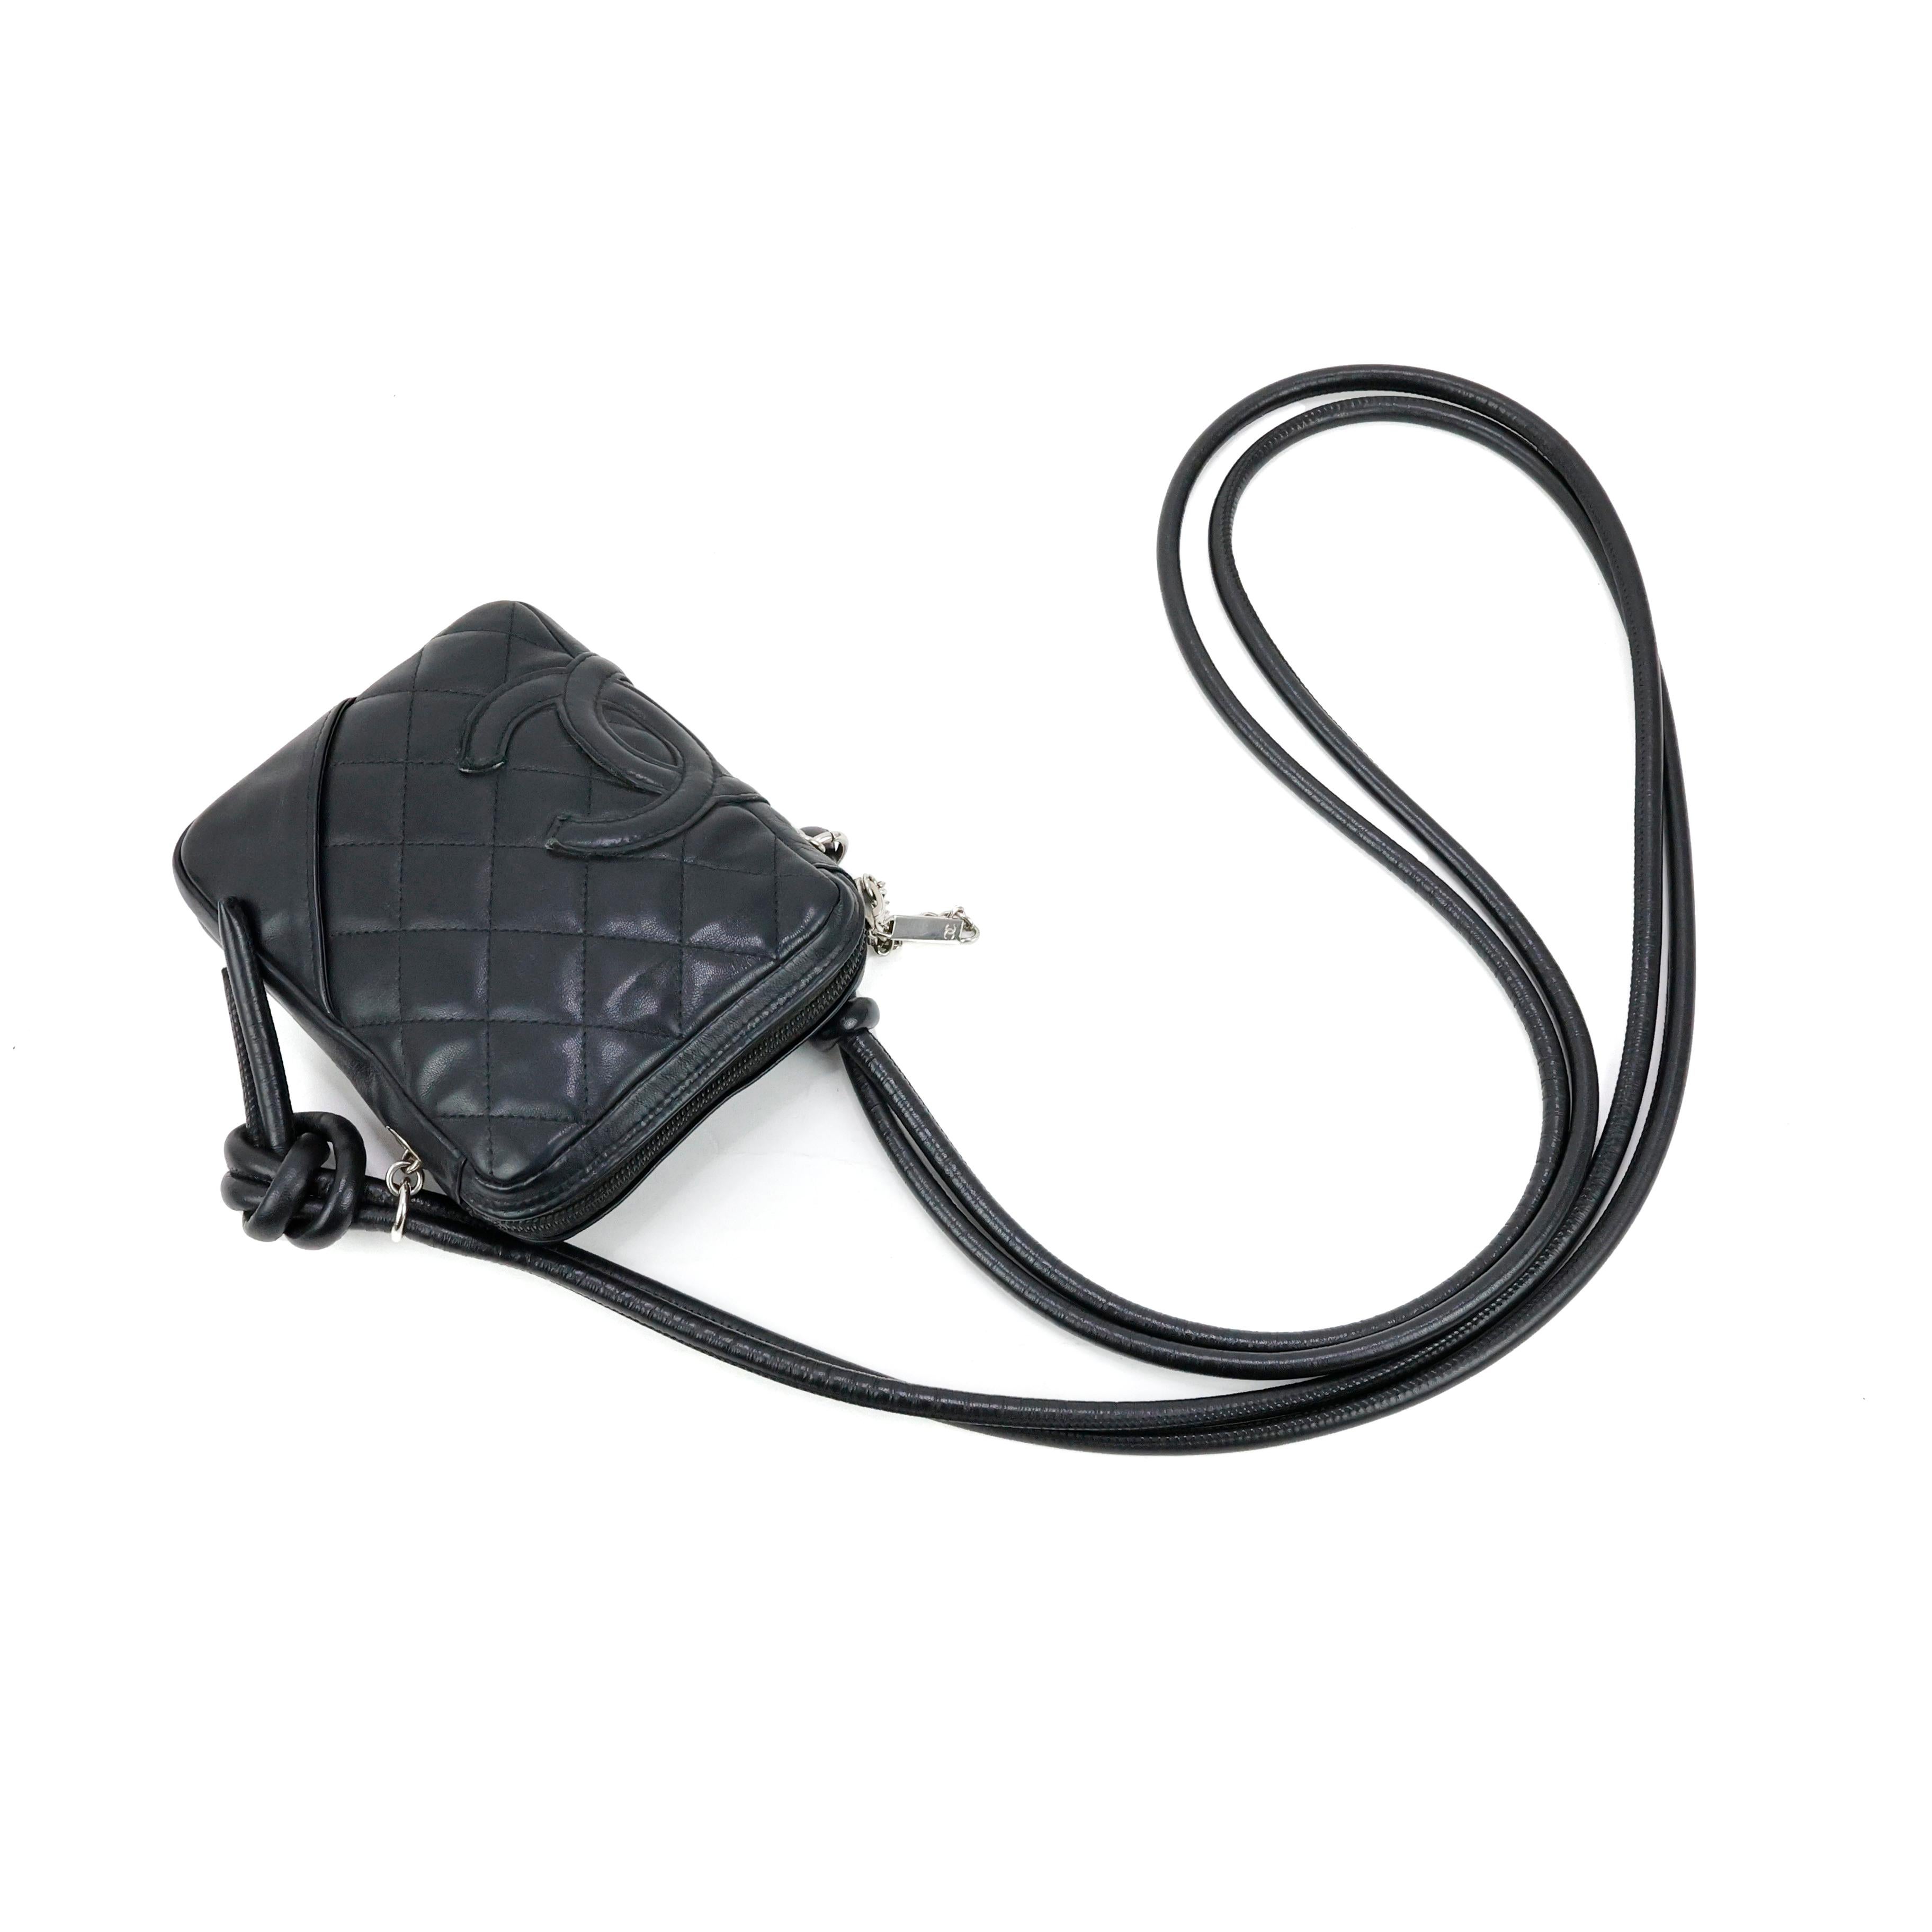 Chanel Cambon Crossbody Bag in Lambskin Leather In Good Condition For Sale In Bressanone, IT